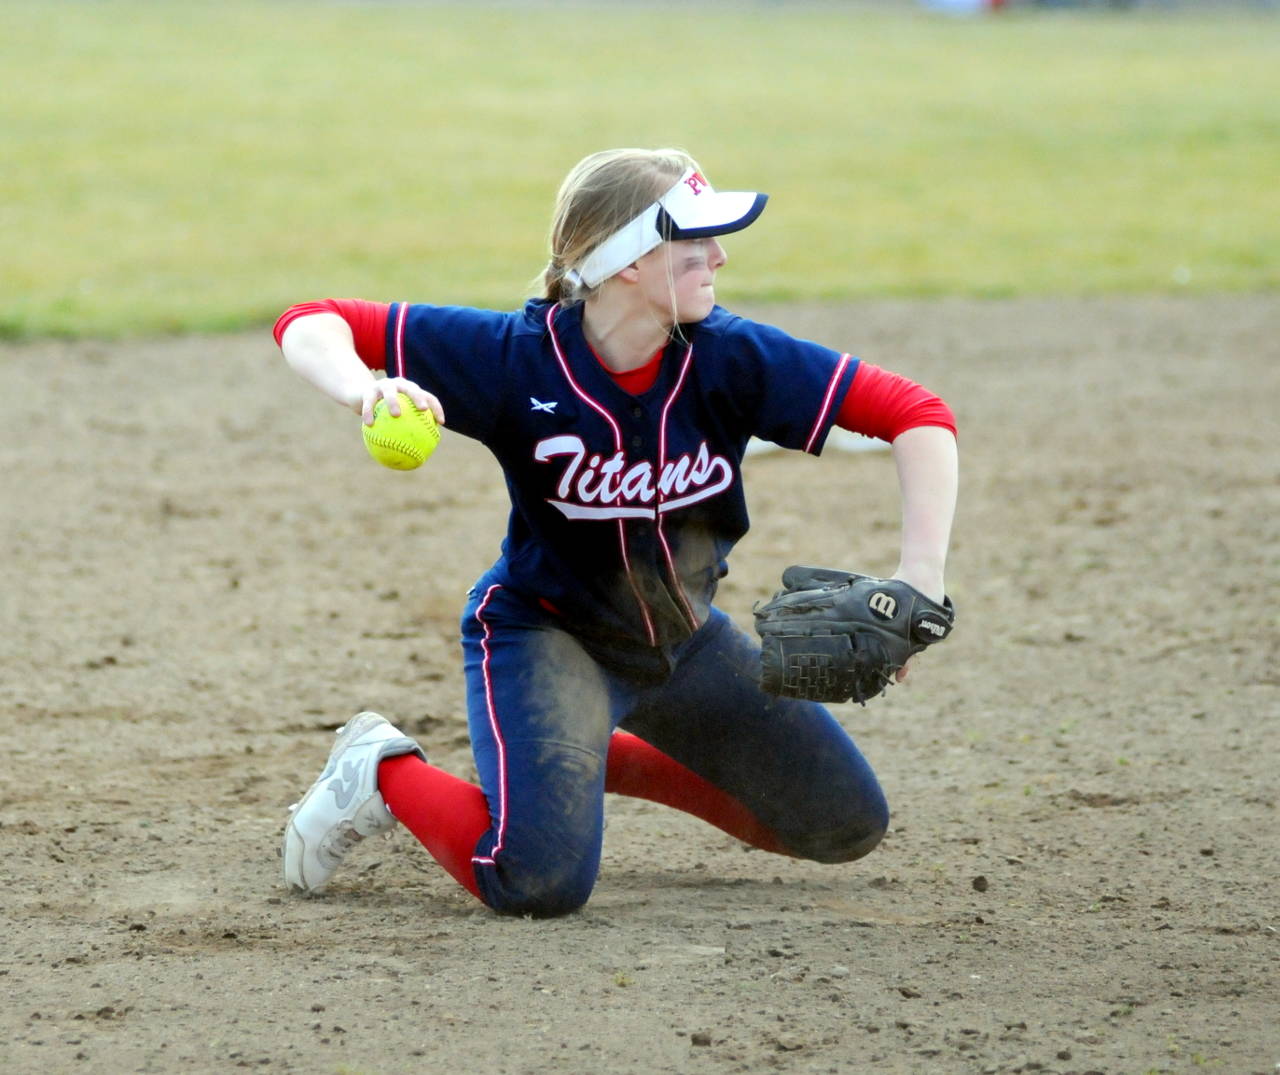 PWV third baseman Katie Adkins throws from her knees after making a diving stop in the first game of a doubleheader against Ocosta on Saturday. (Ryan Sparks | Grays Harbor News Group)